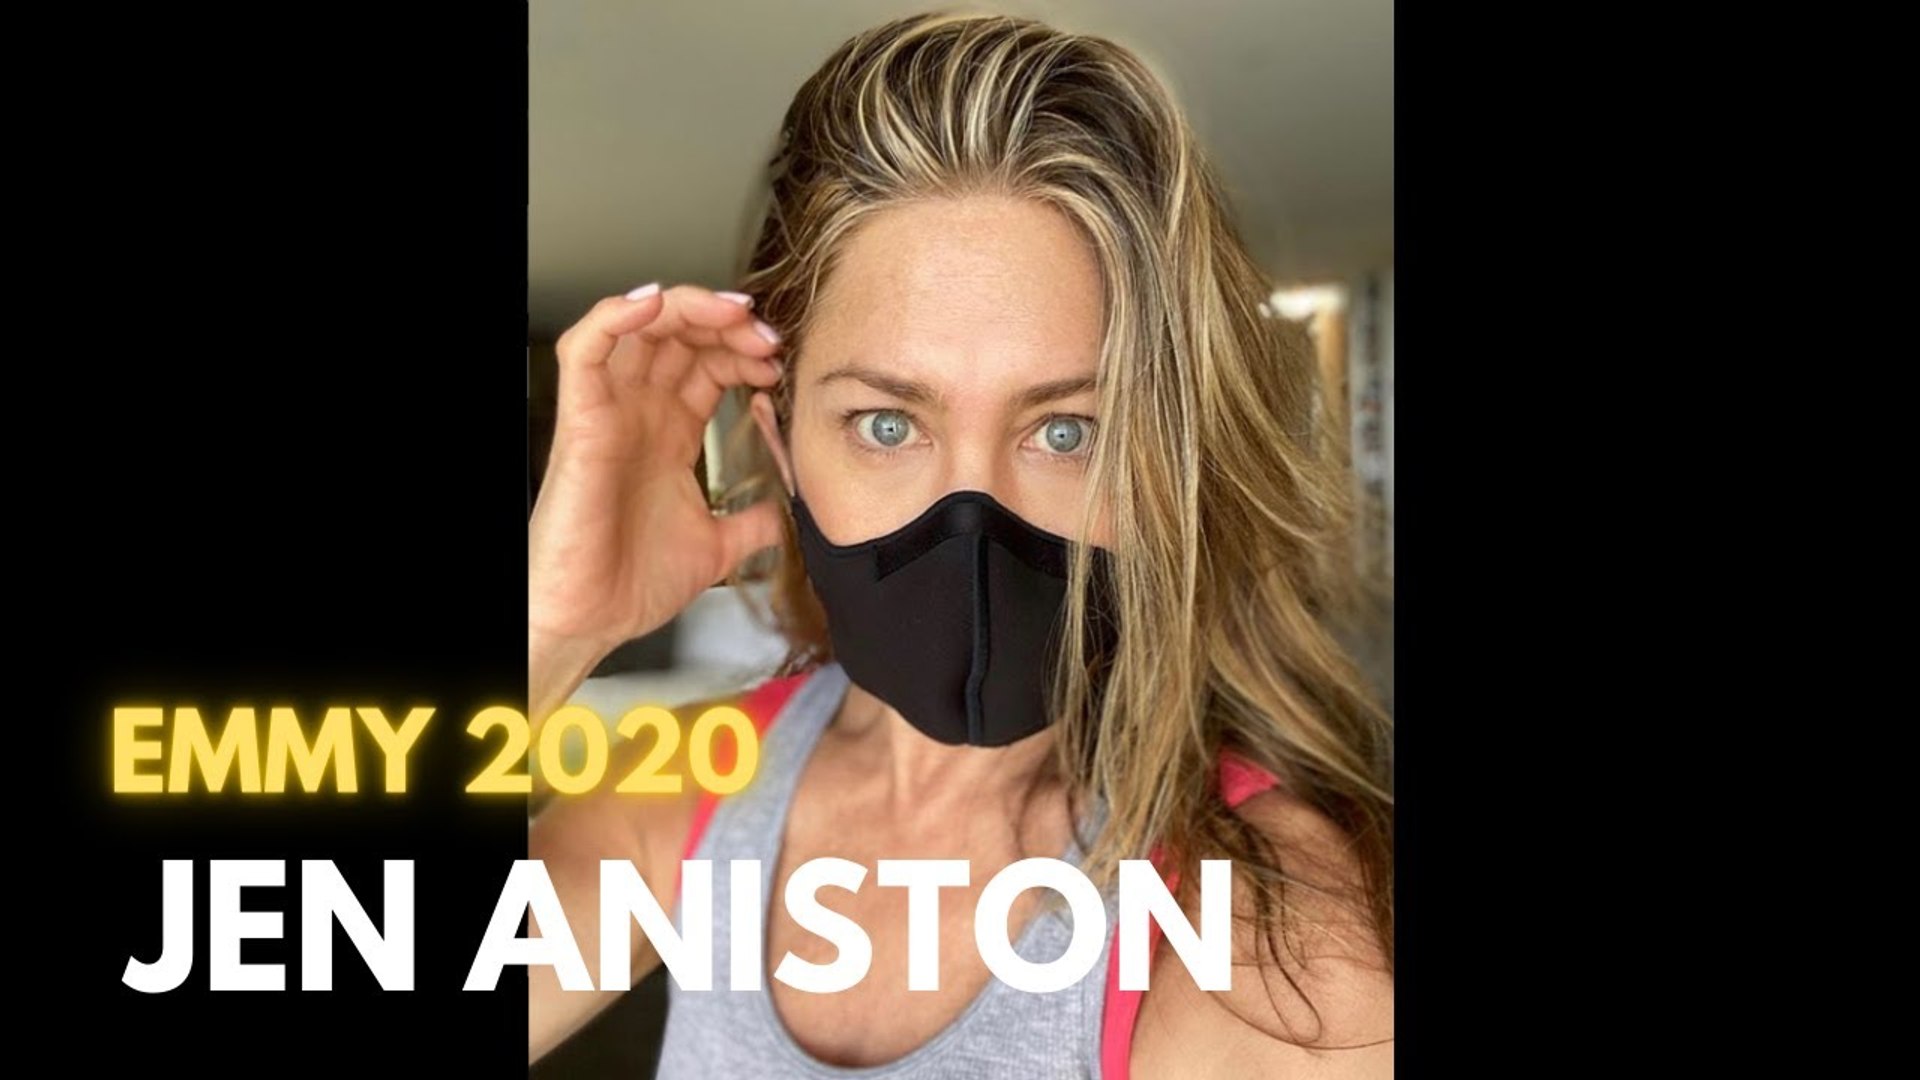 How Jennifer Aniston And Celebrities Prepare For Emmy 2020 Video Dailymotion